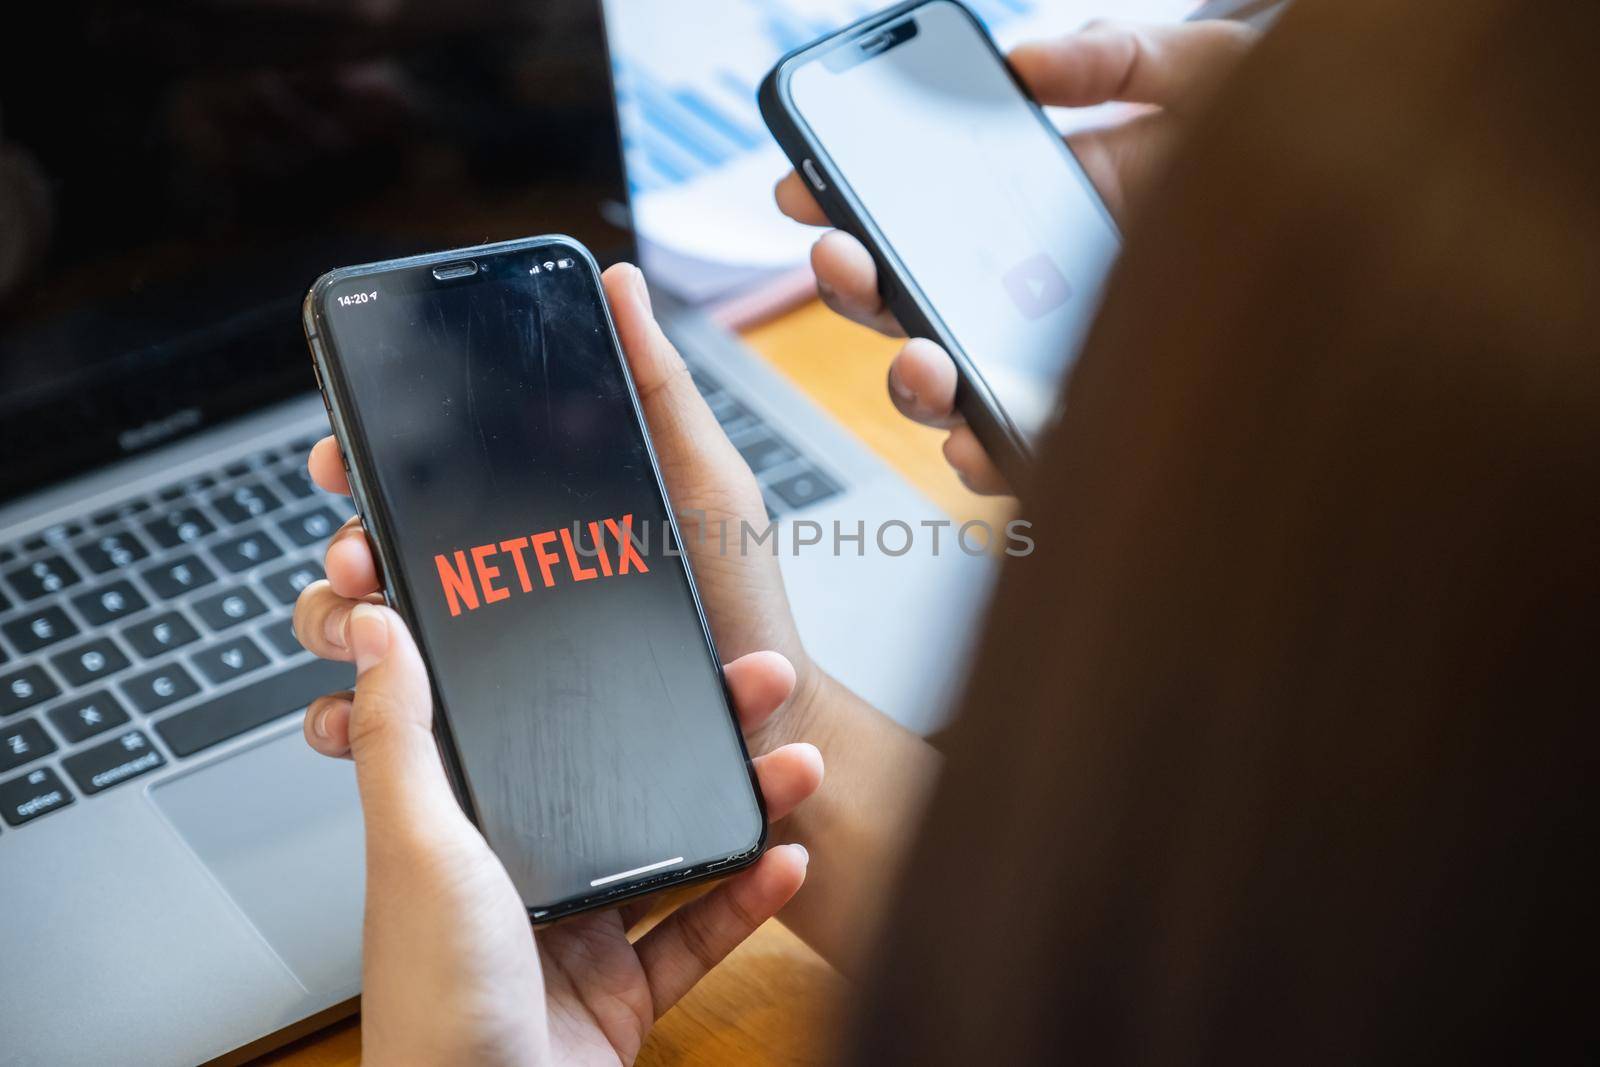 CHIANG MAI, THAILAND - FEB 11, 2021 : Woman and friend holding Phone with Netflix logotype on a screen and sharing her movie list